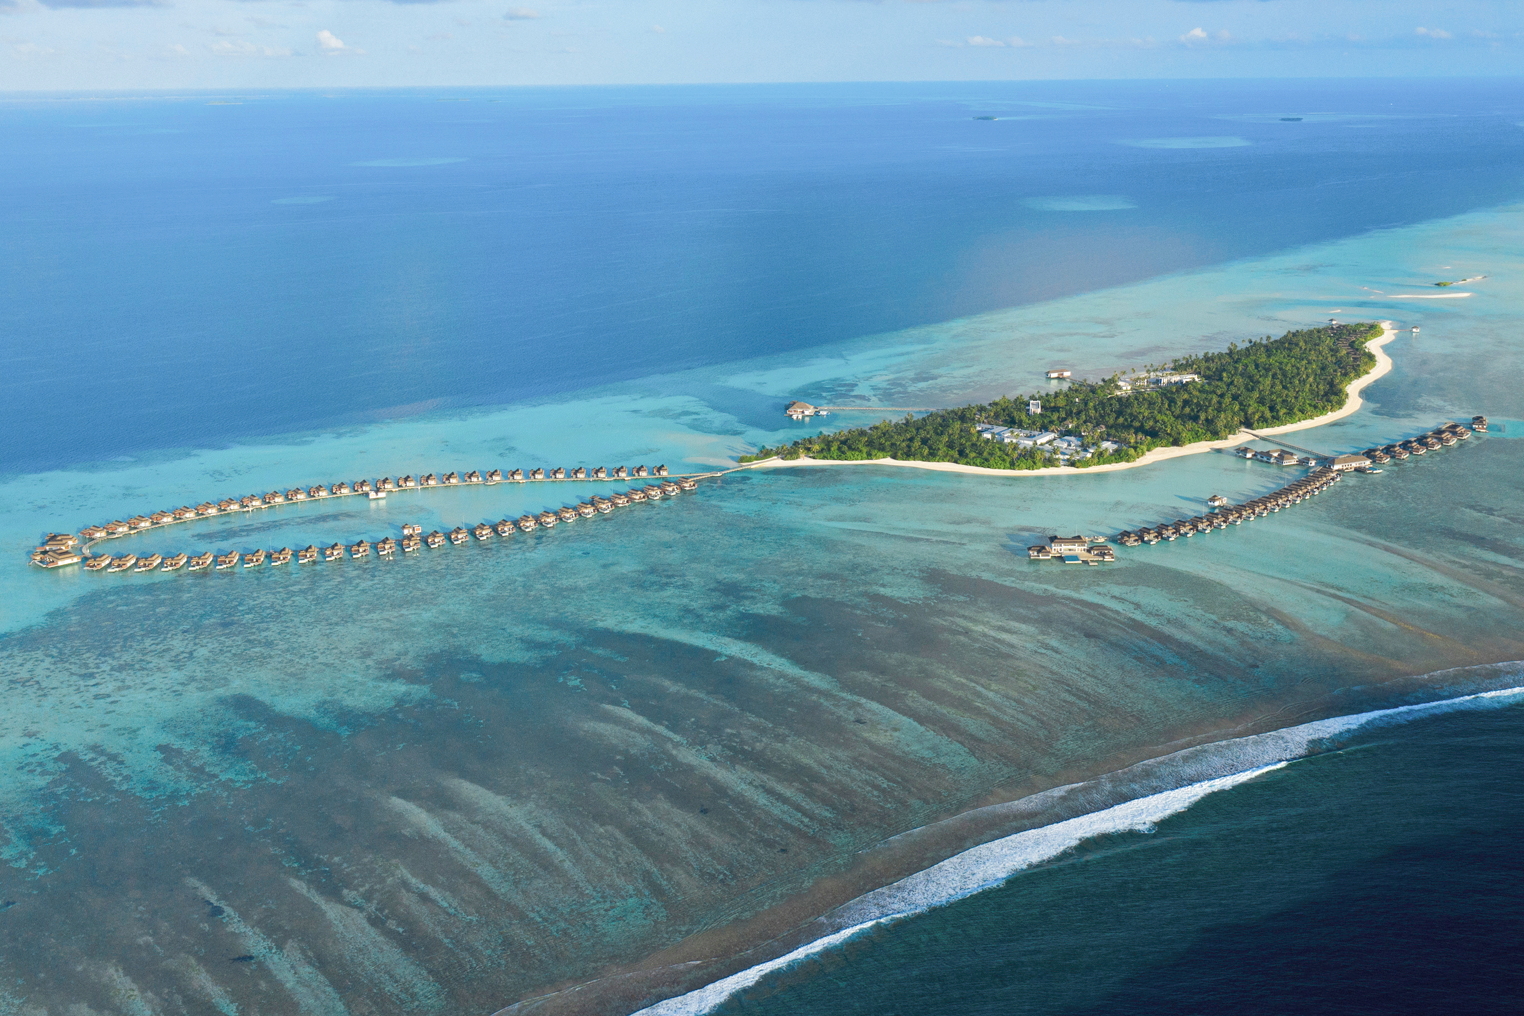 Set amidst 18 hectares of lush tropical flora and fauna on the Gaafu Alifu Atoll, the Pullman Maldives Maamutaa Resort is an all-inclusive resort that boasts 122 villas, including two exclusive Aqua Villas featuring bedrooms submerged beneath the turquoise waters. Click to enlarge.